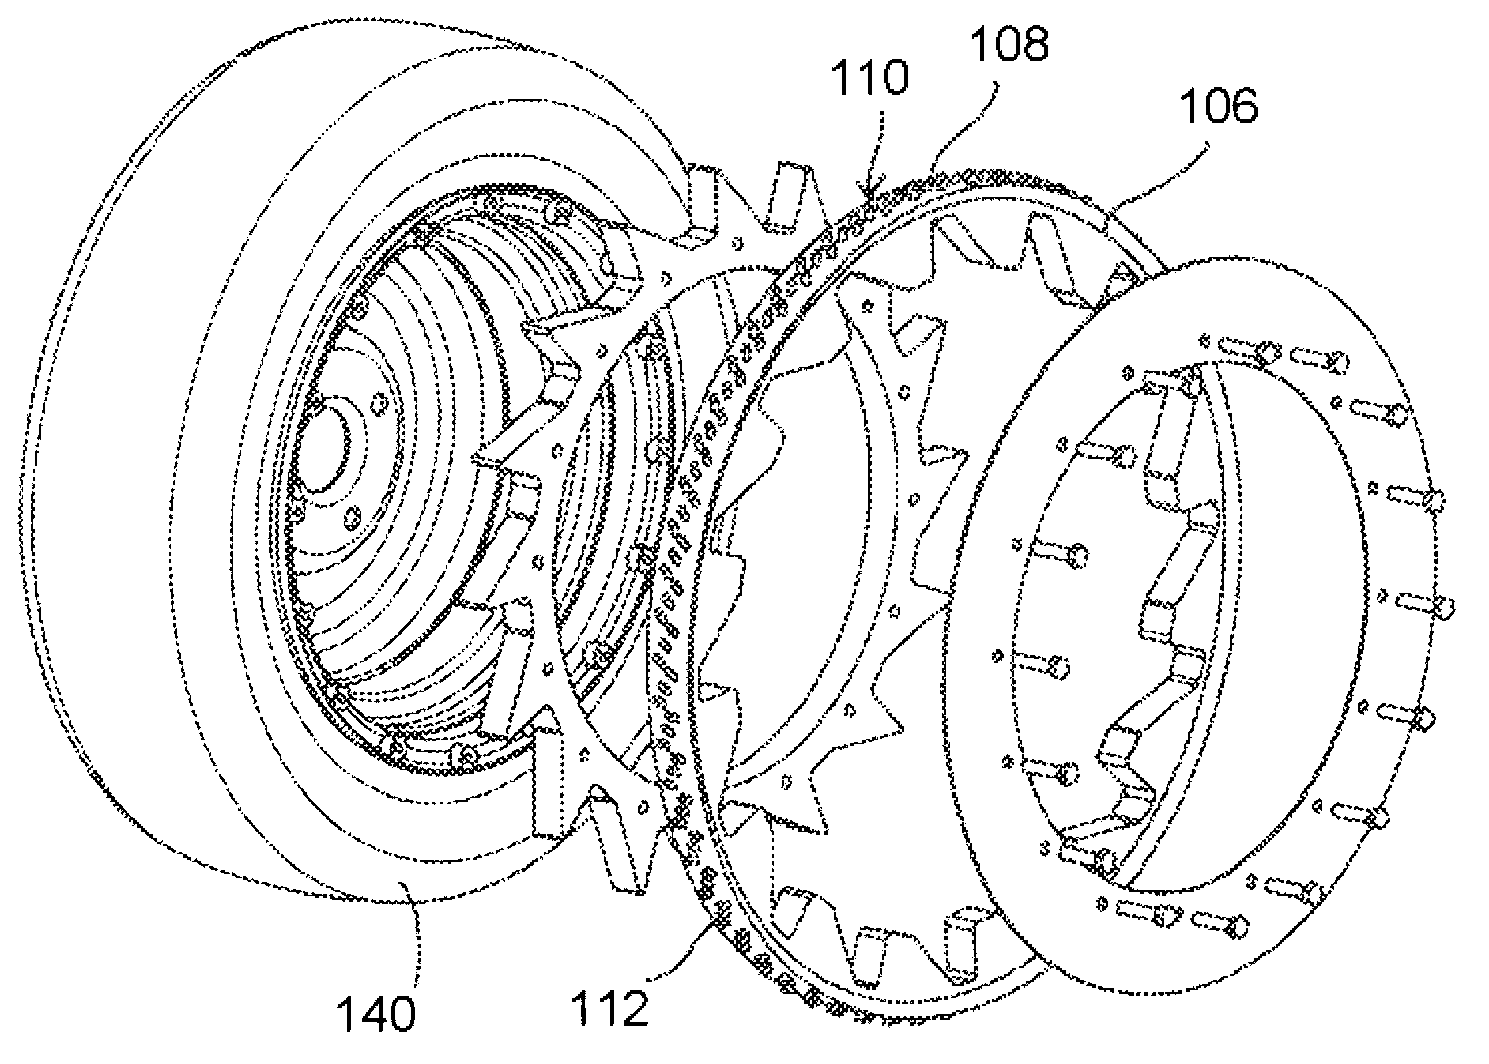 An apparatus for preventing the skidding of a vehicle provided with wheels